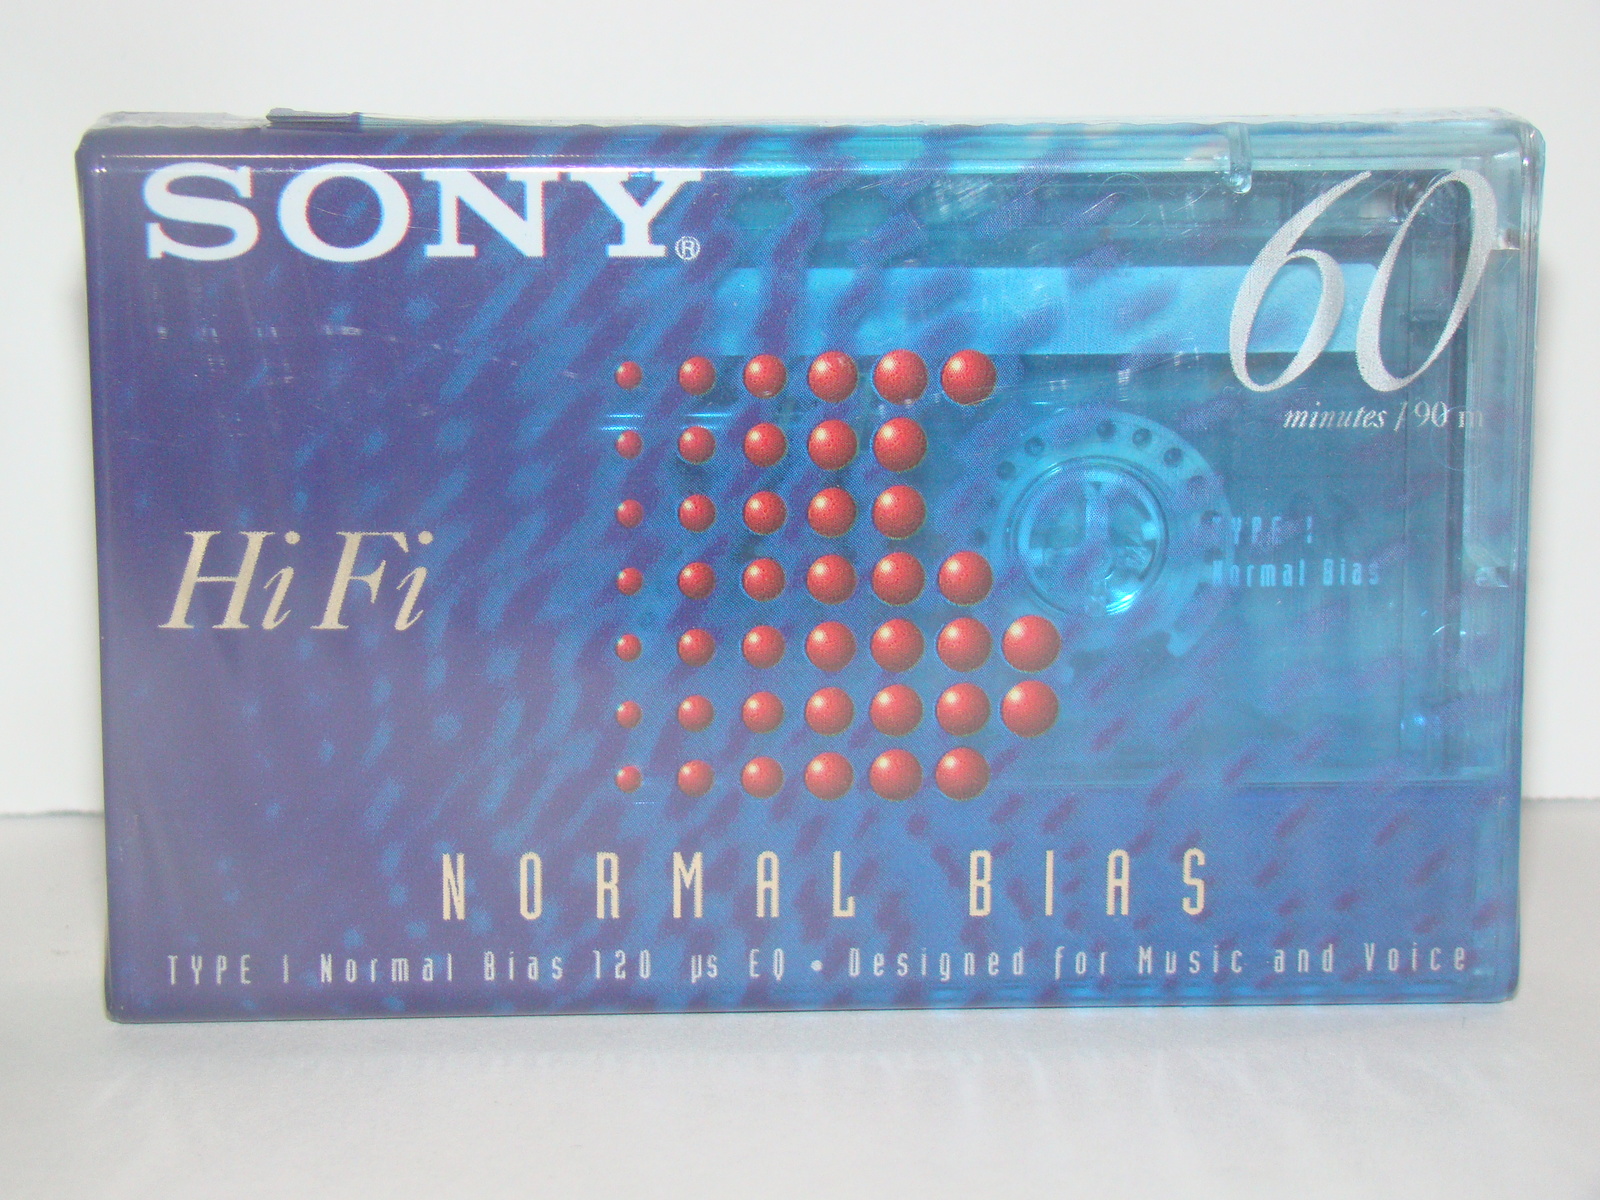 SONY - Hi Fi - NORMAL BIAS - 60 MINUTES - Blank Cassette Tape (New) - $10.00